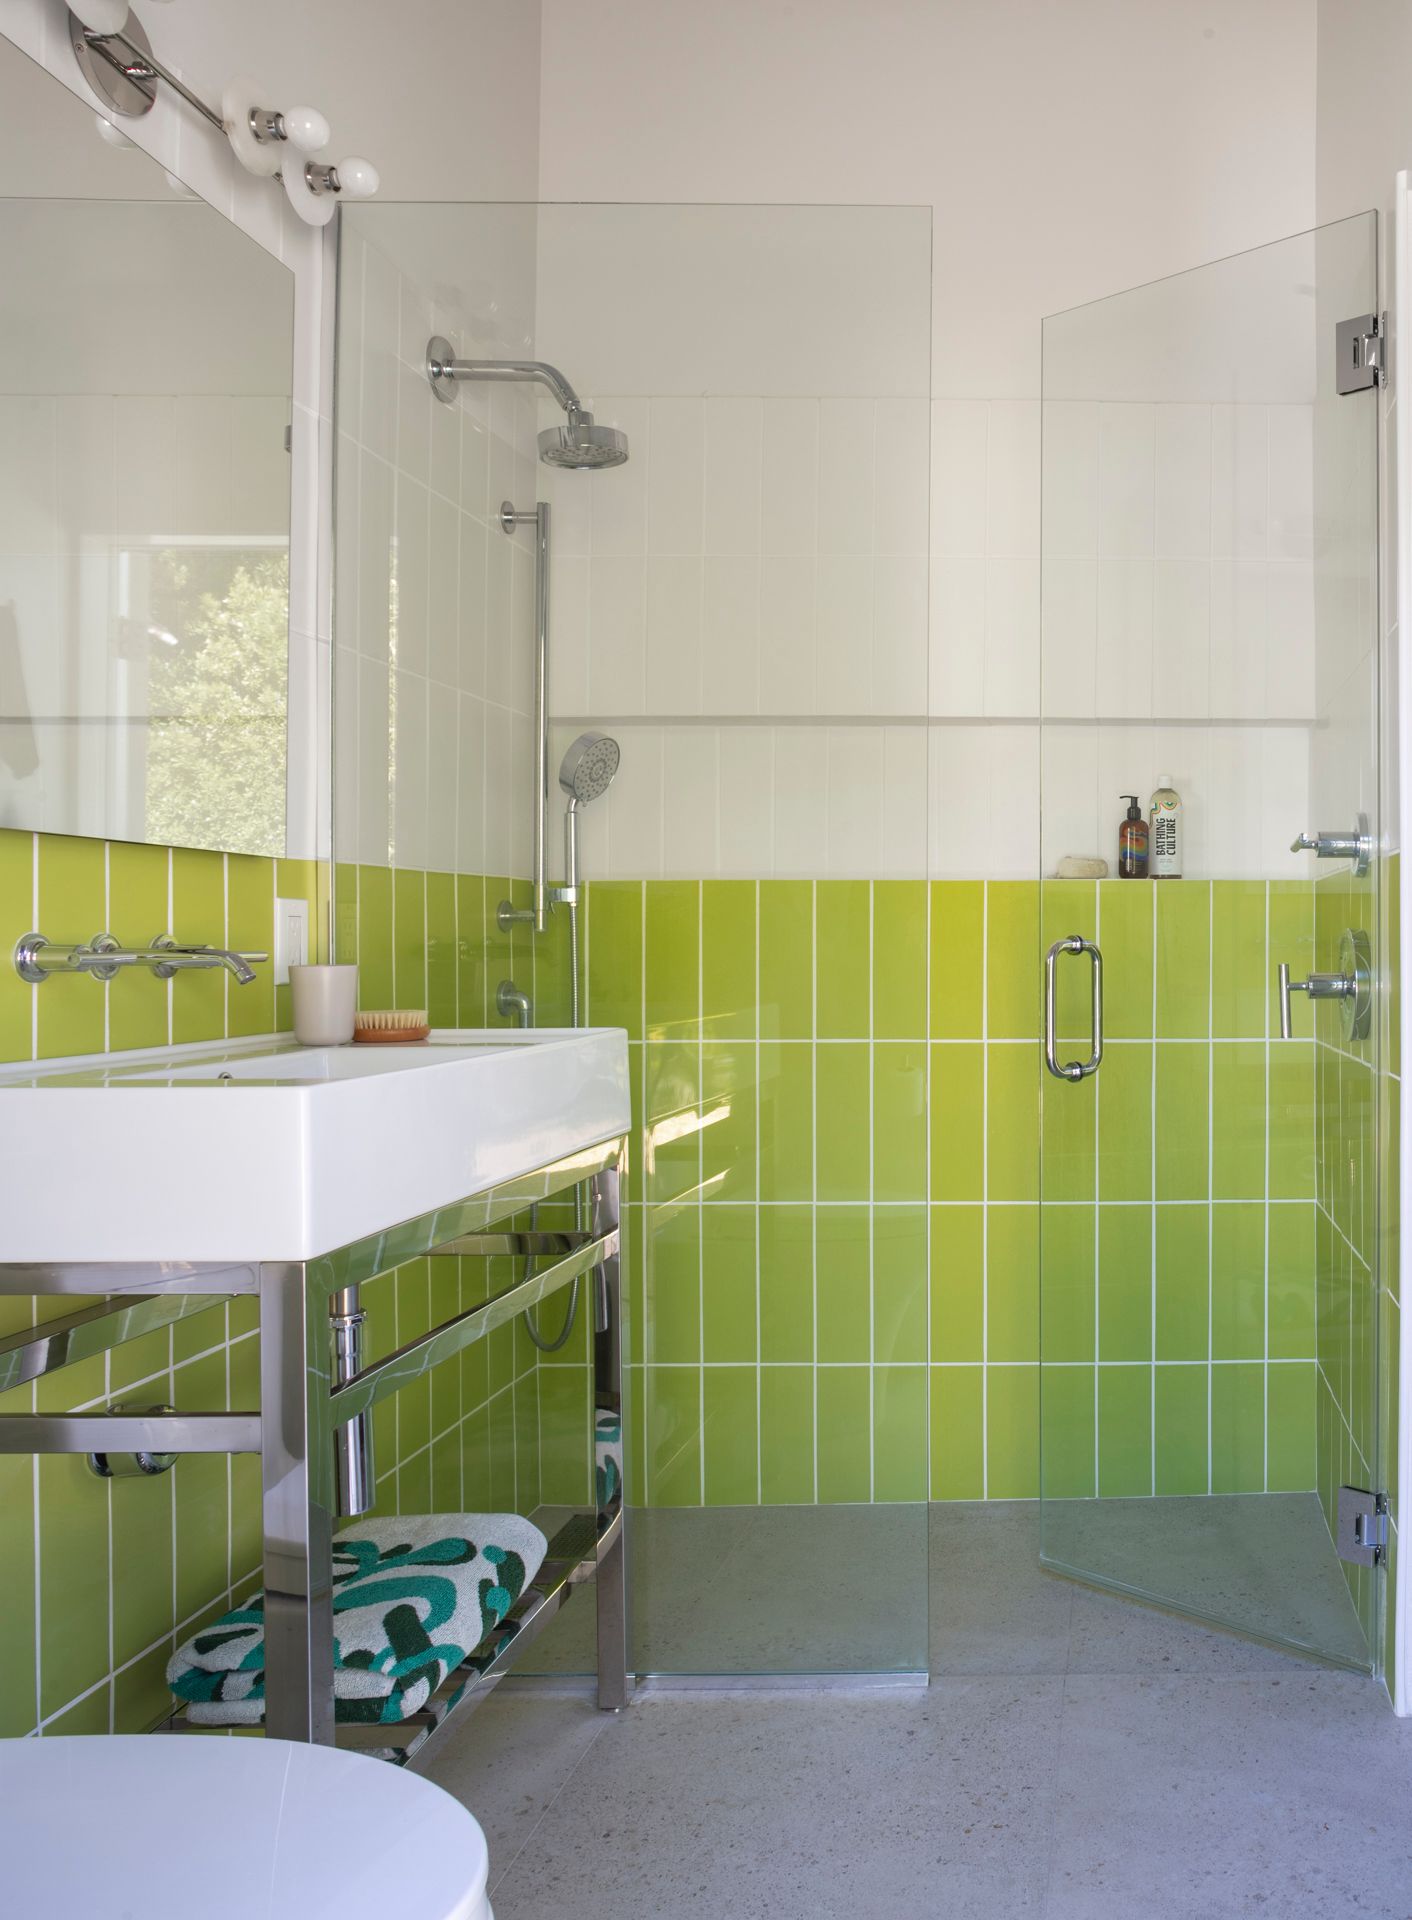 image of bathroom with green tile